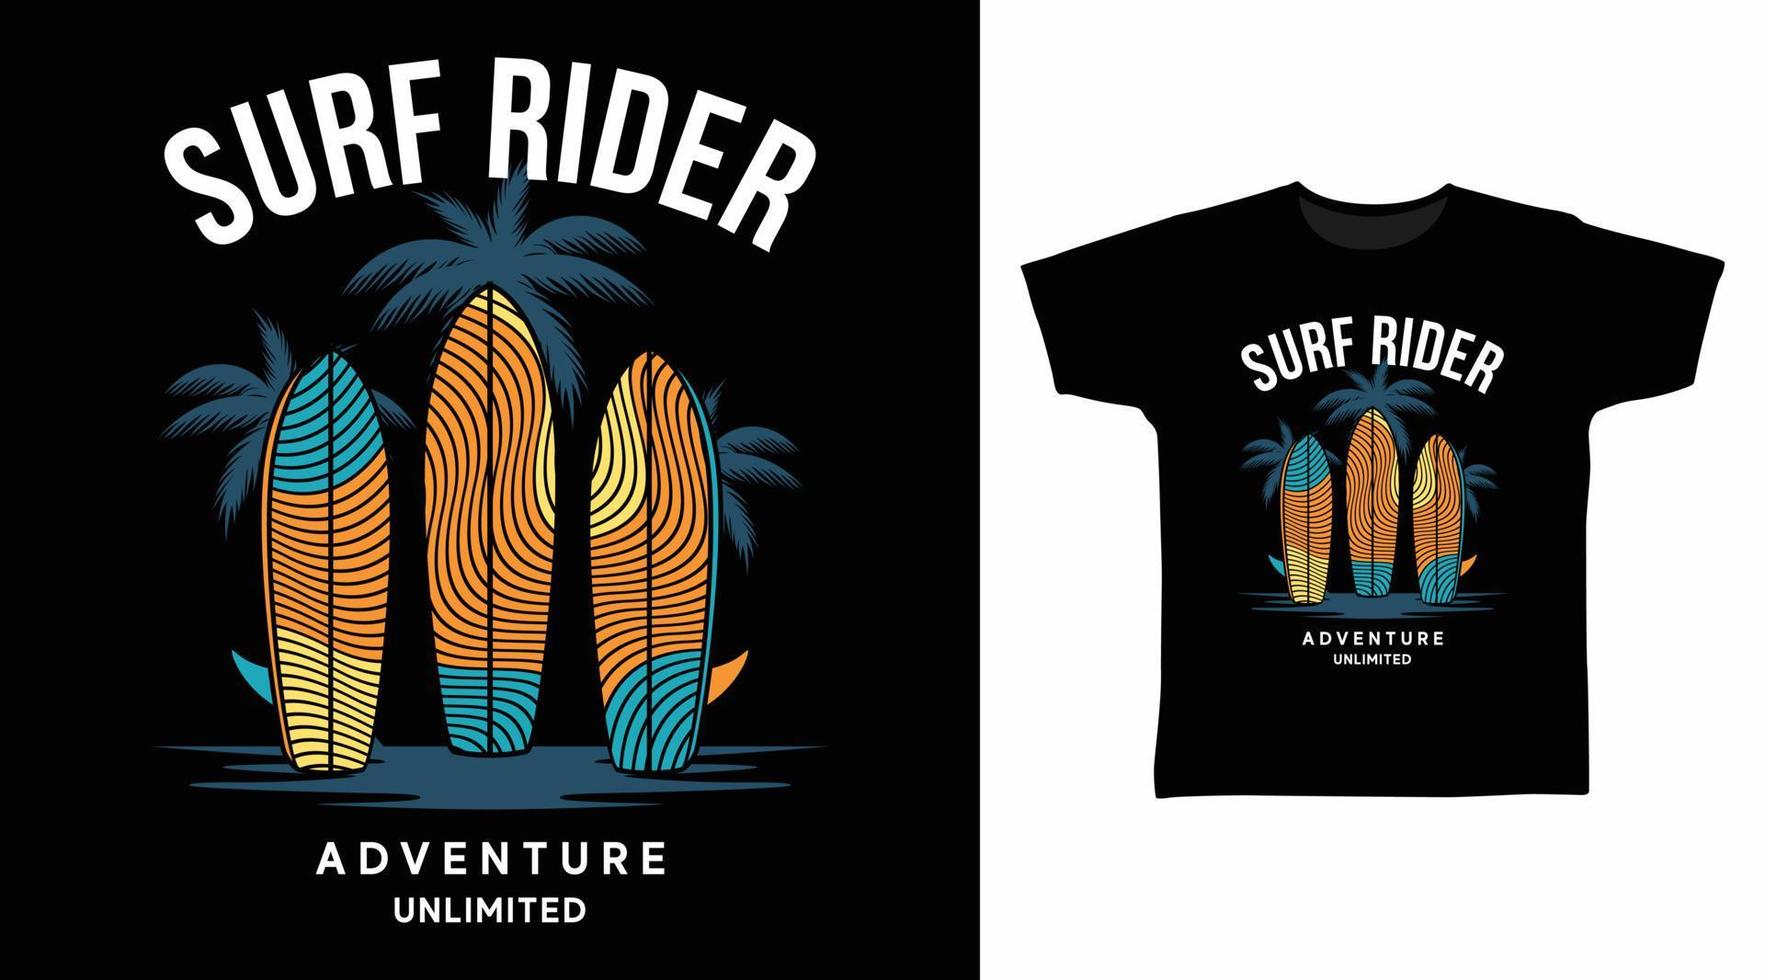 Surf rider design vector with surfboard illustration, ready for print on t-shirt